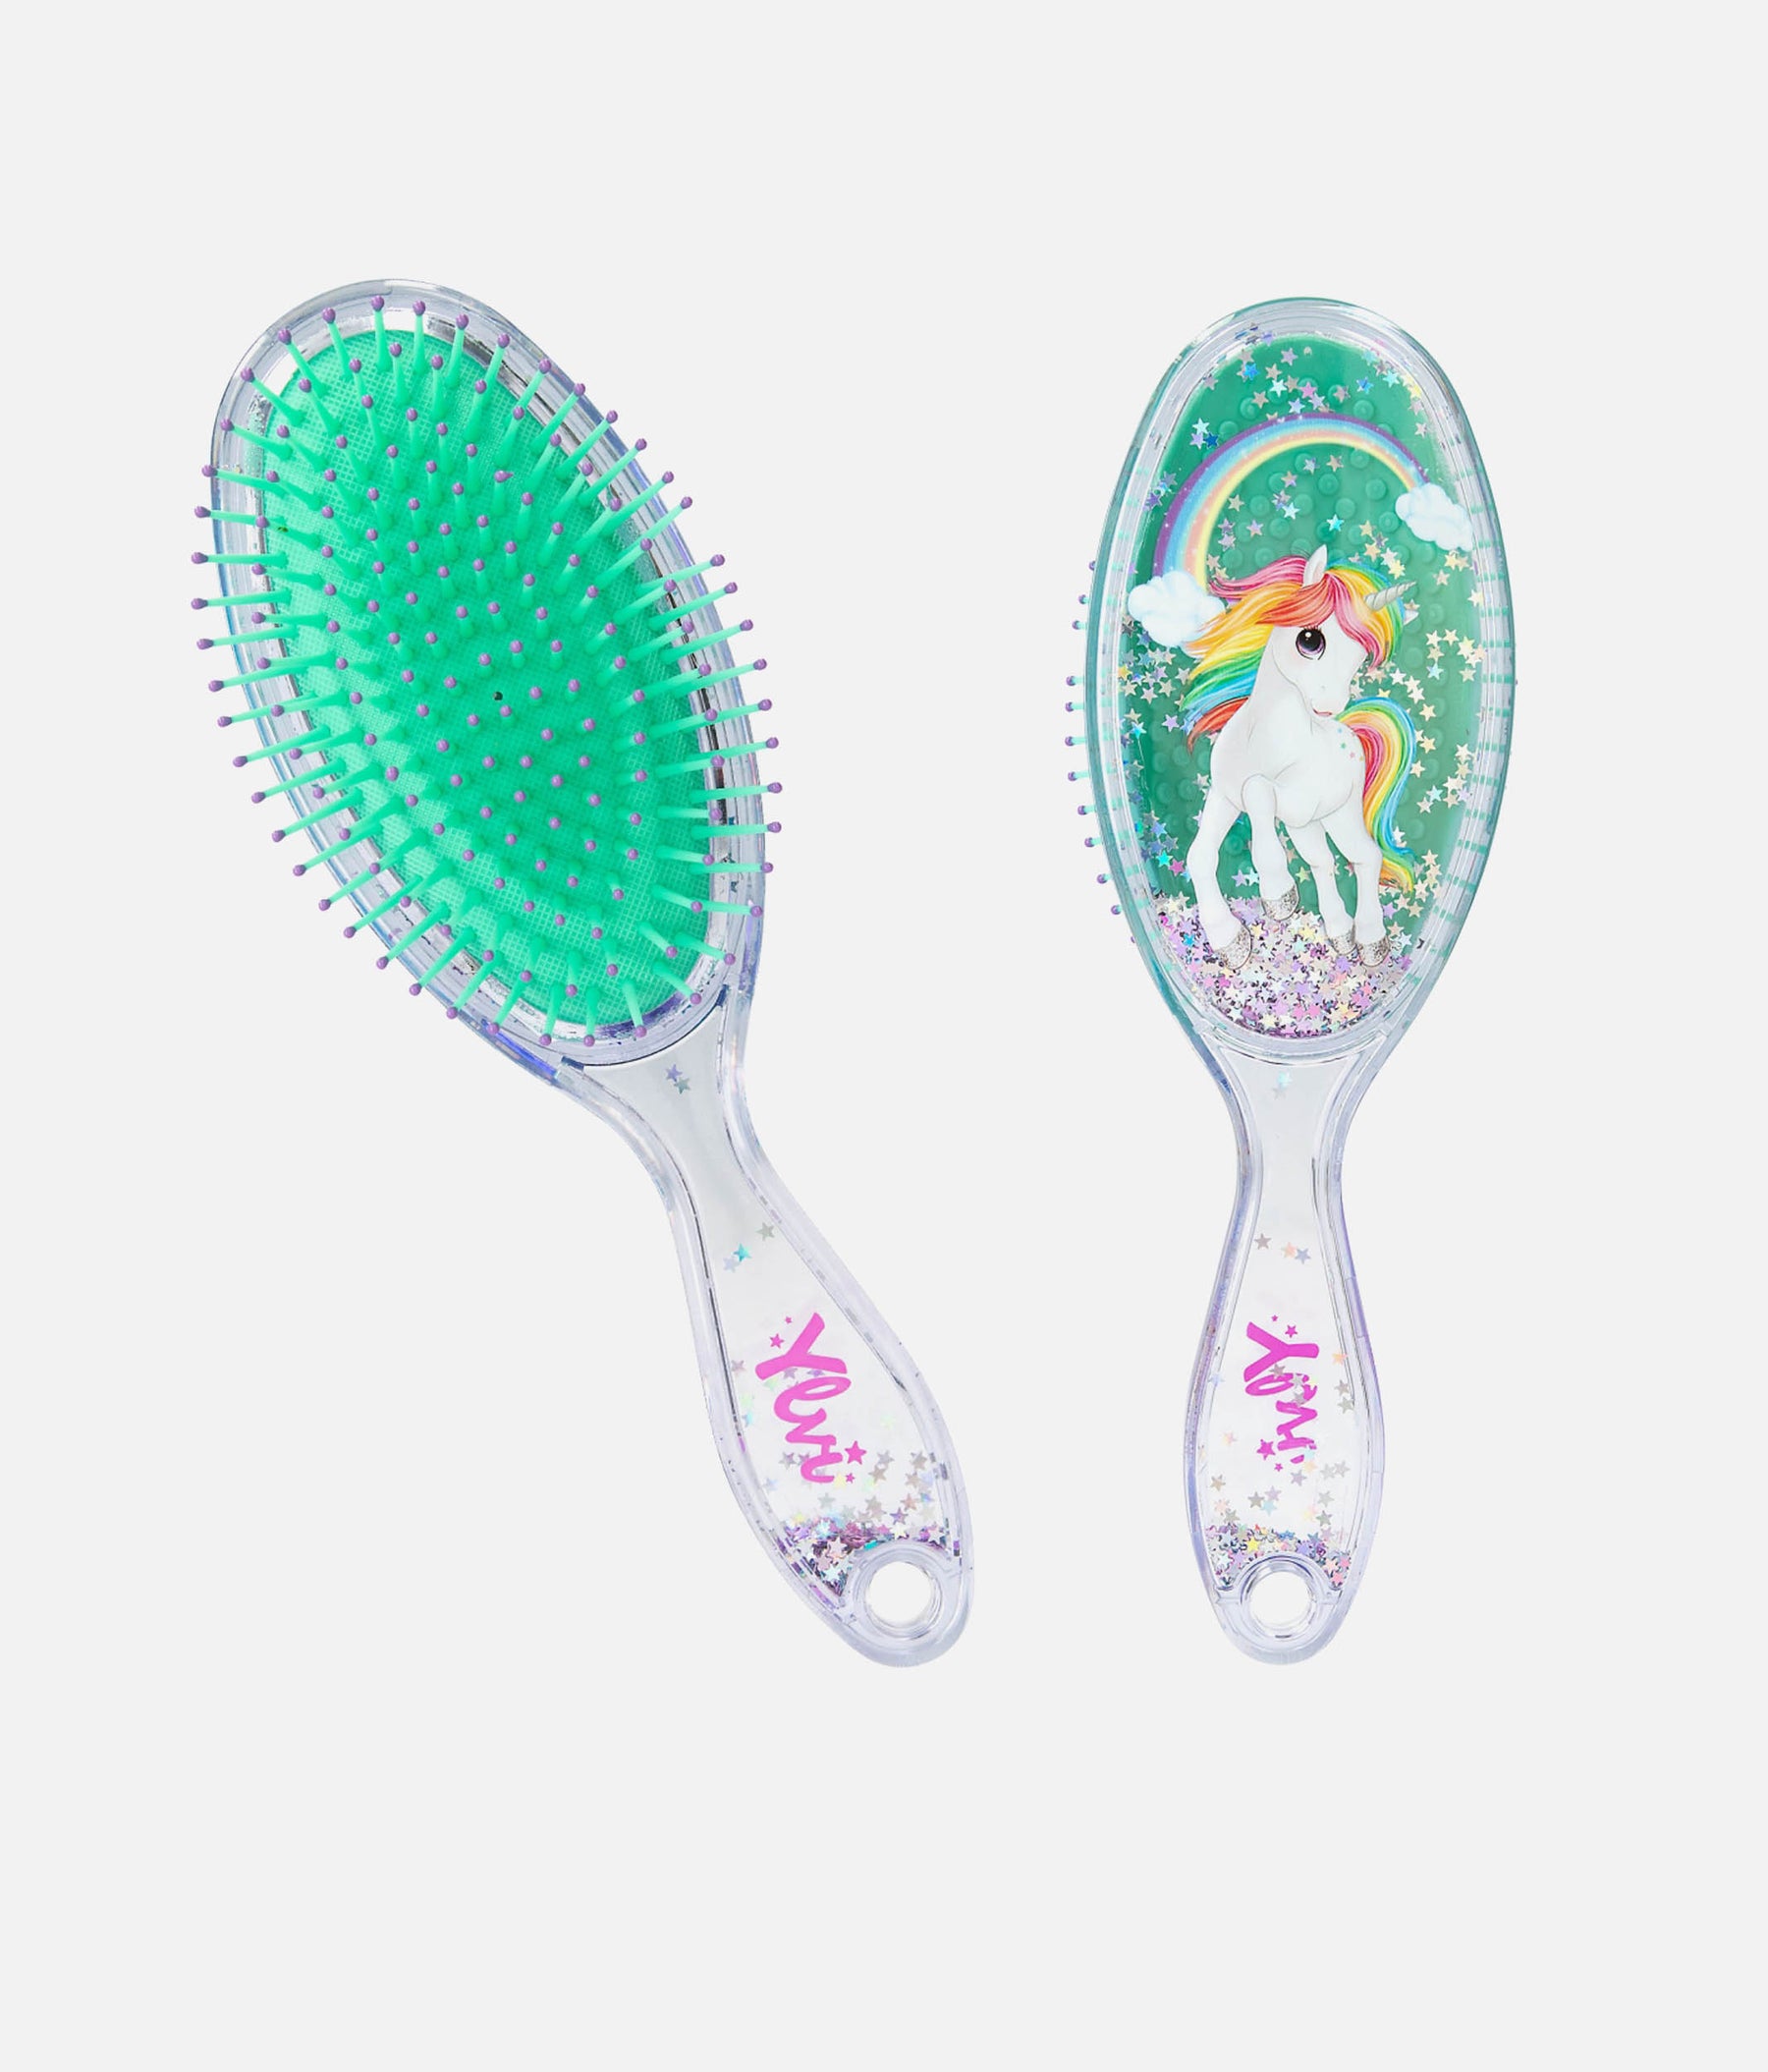 Hairbrush With Confetti - 0012283